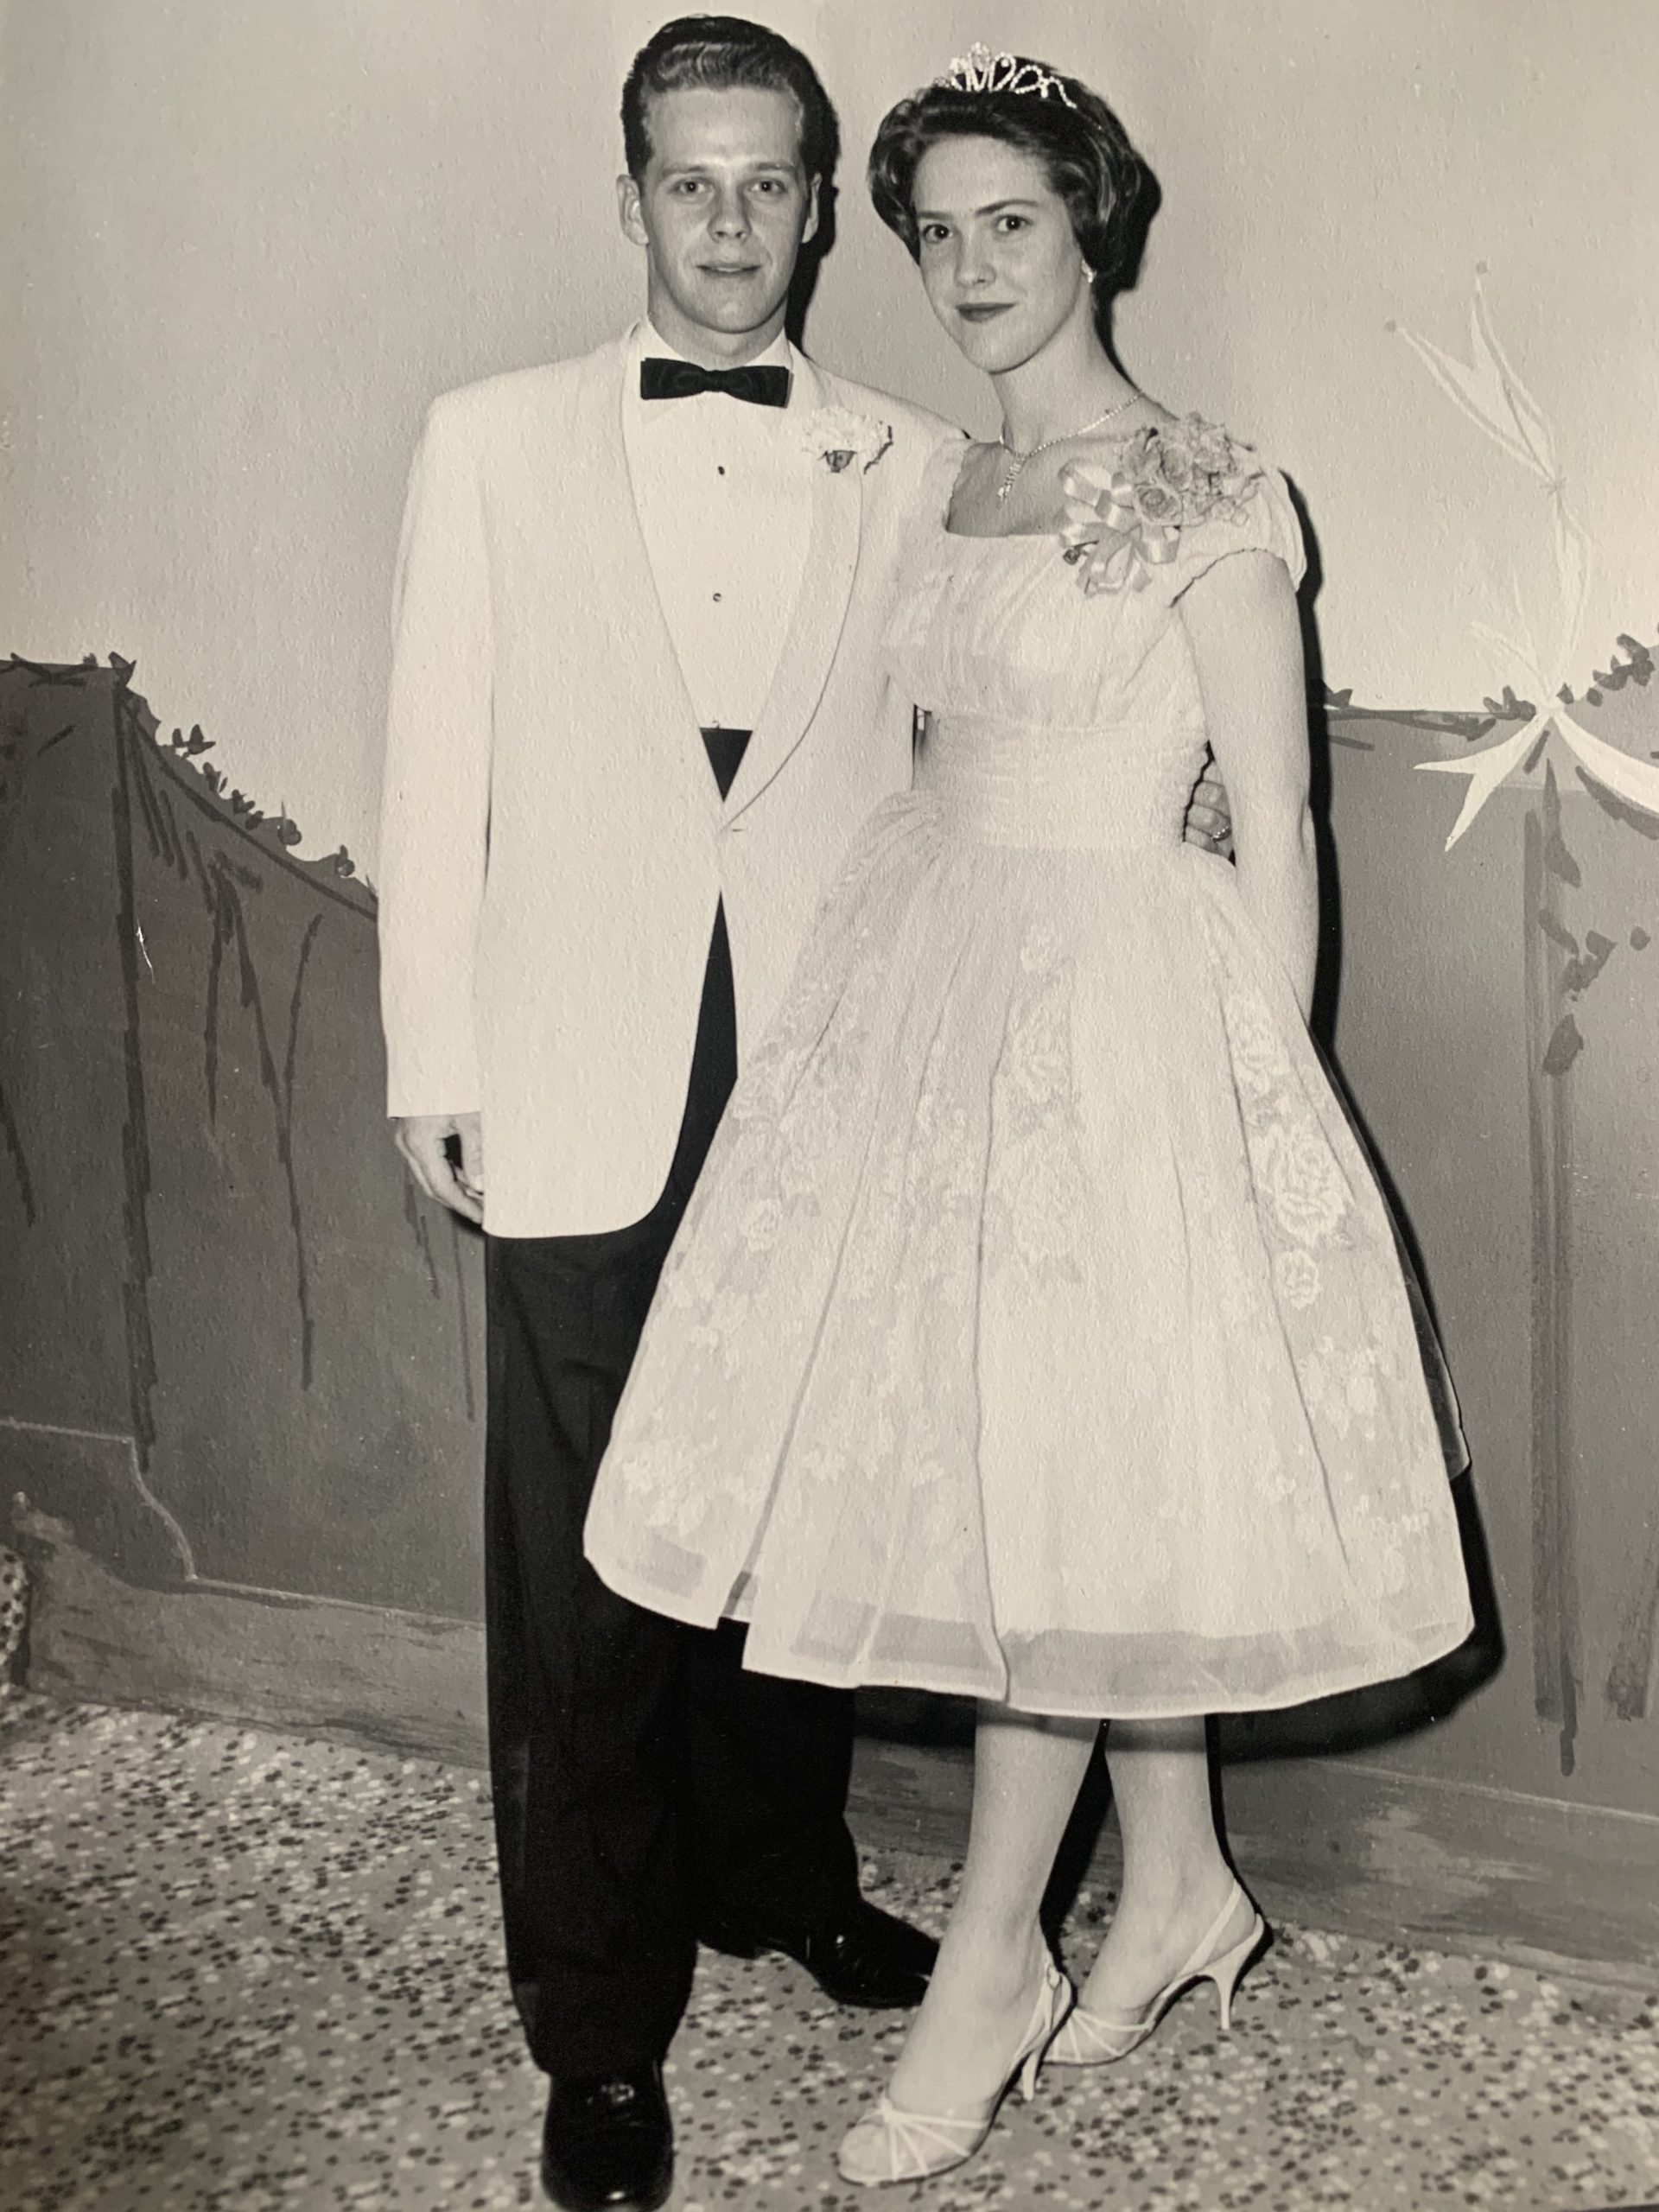 Charles and Virginia Styler, high school prom.